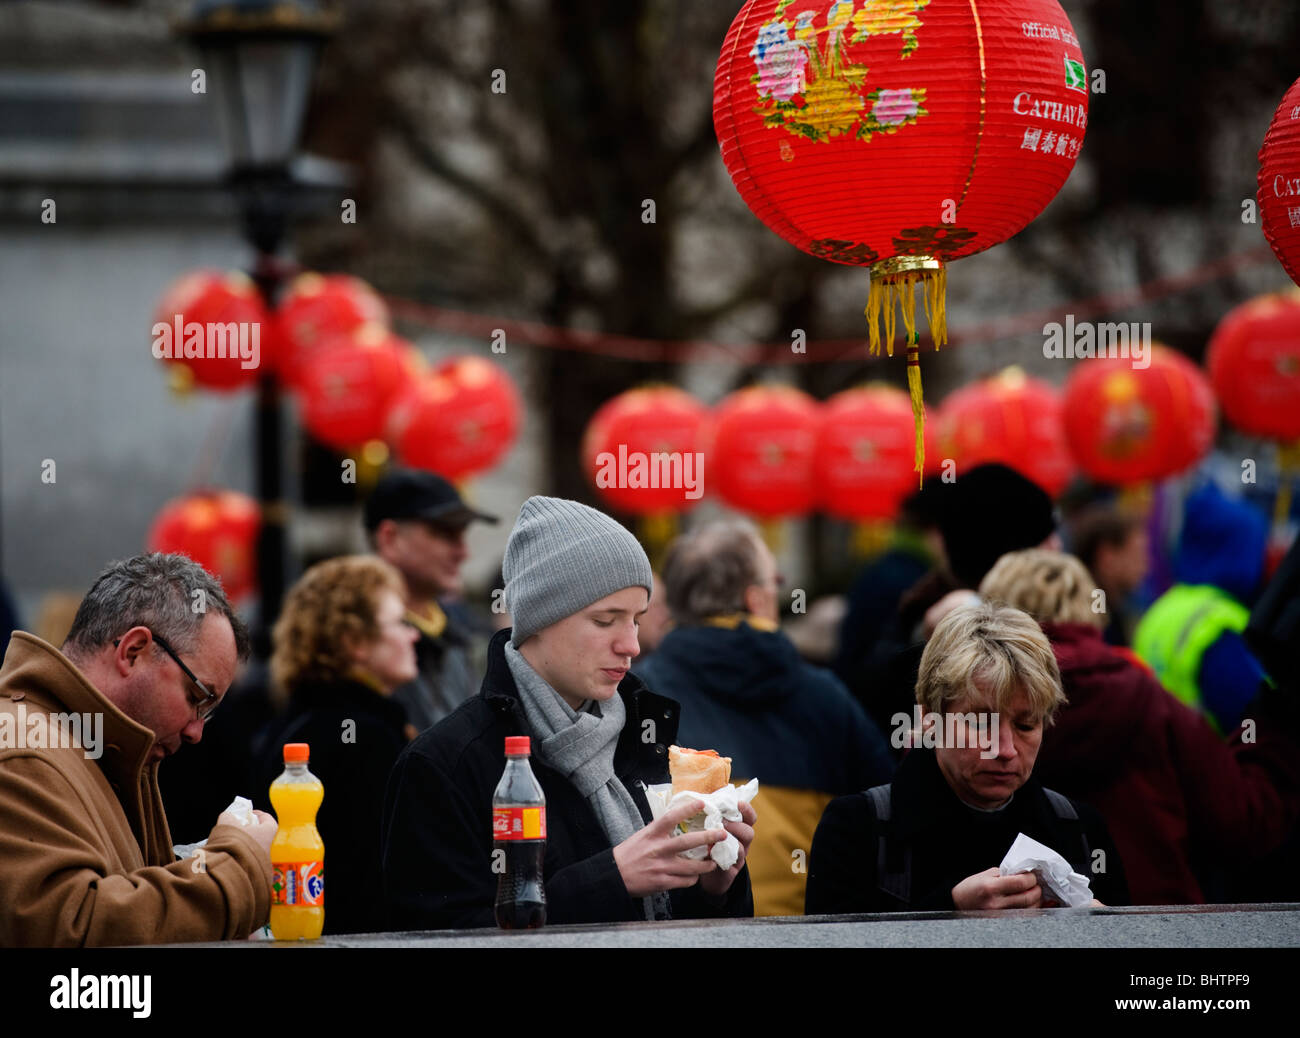 Crowd of people and red balloons and a paper lantern at Chinese New Year celebrations in Trafalgar Square London UK Stock Photo